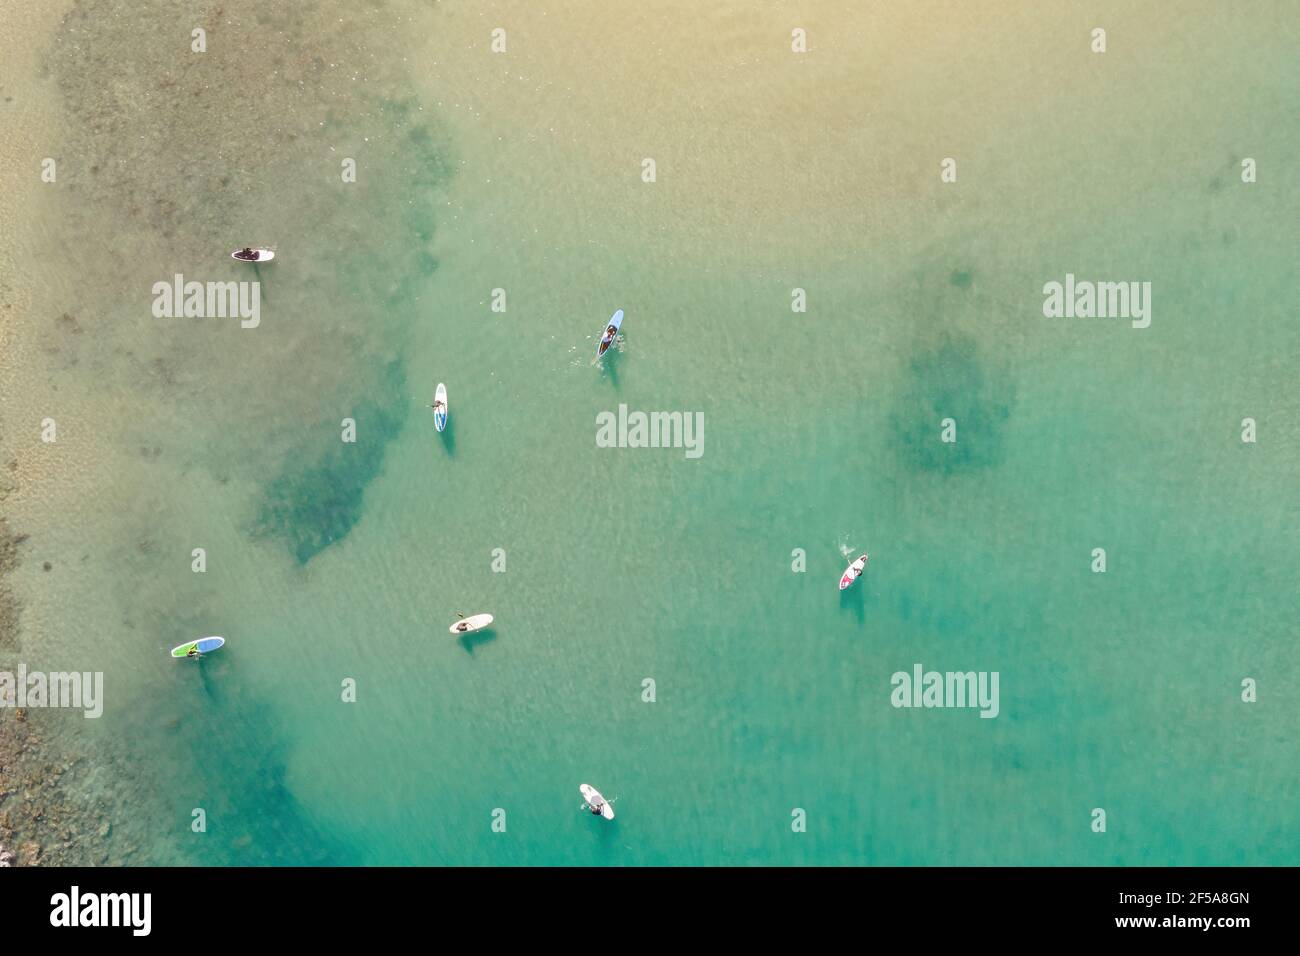 Aerial view by drone of people practicing Stand Up Paddle or SUP in Mediterranean turquoise clear sea. Stock Photo